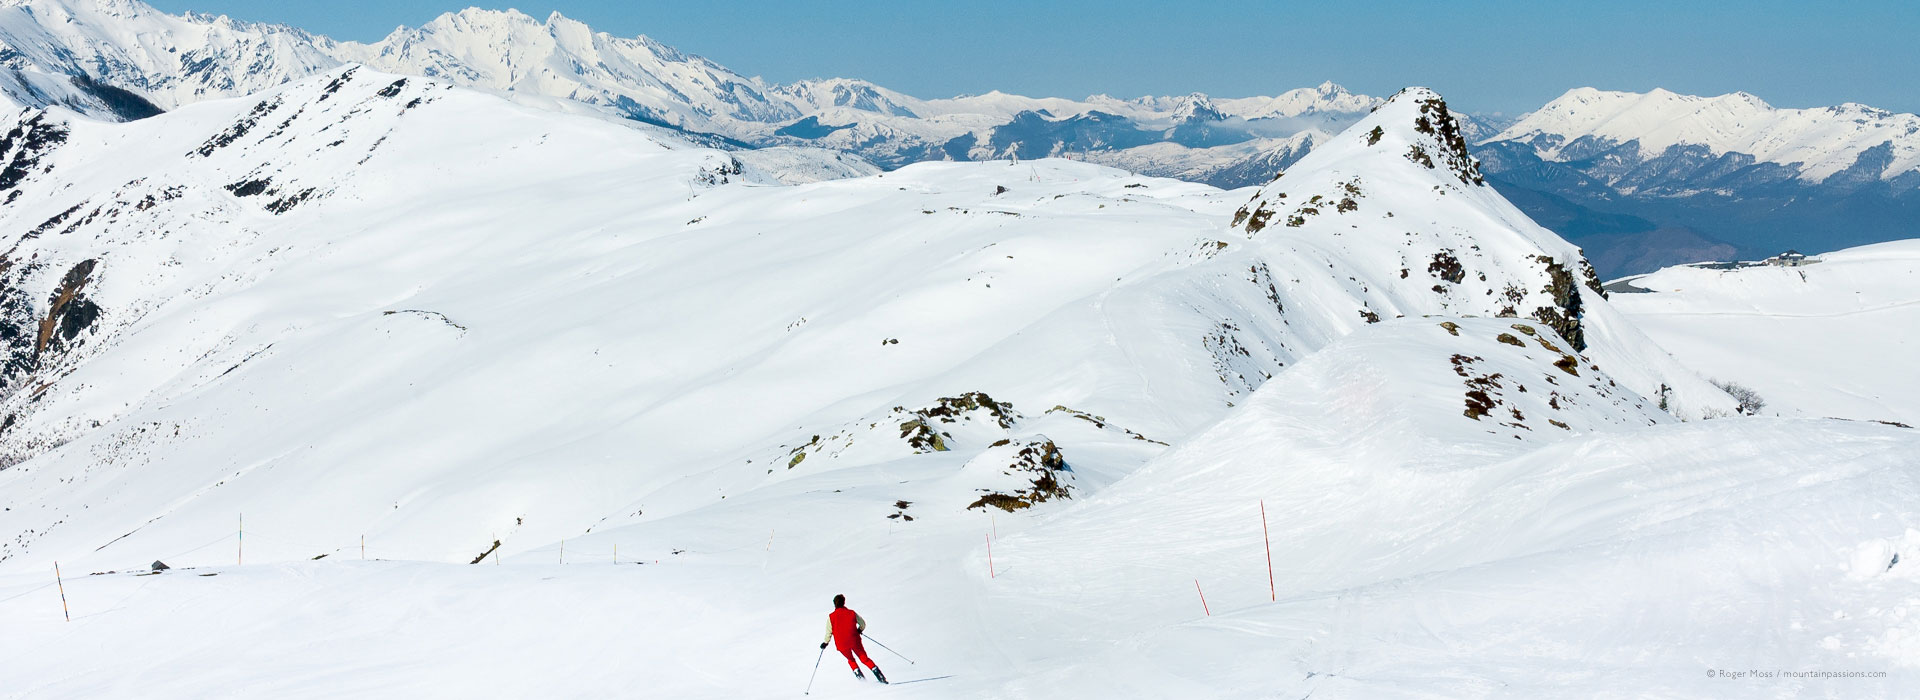 Wide view of mountain scenery with skier on piste at Hautacam.